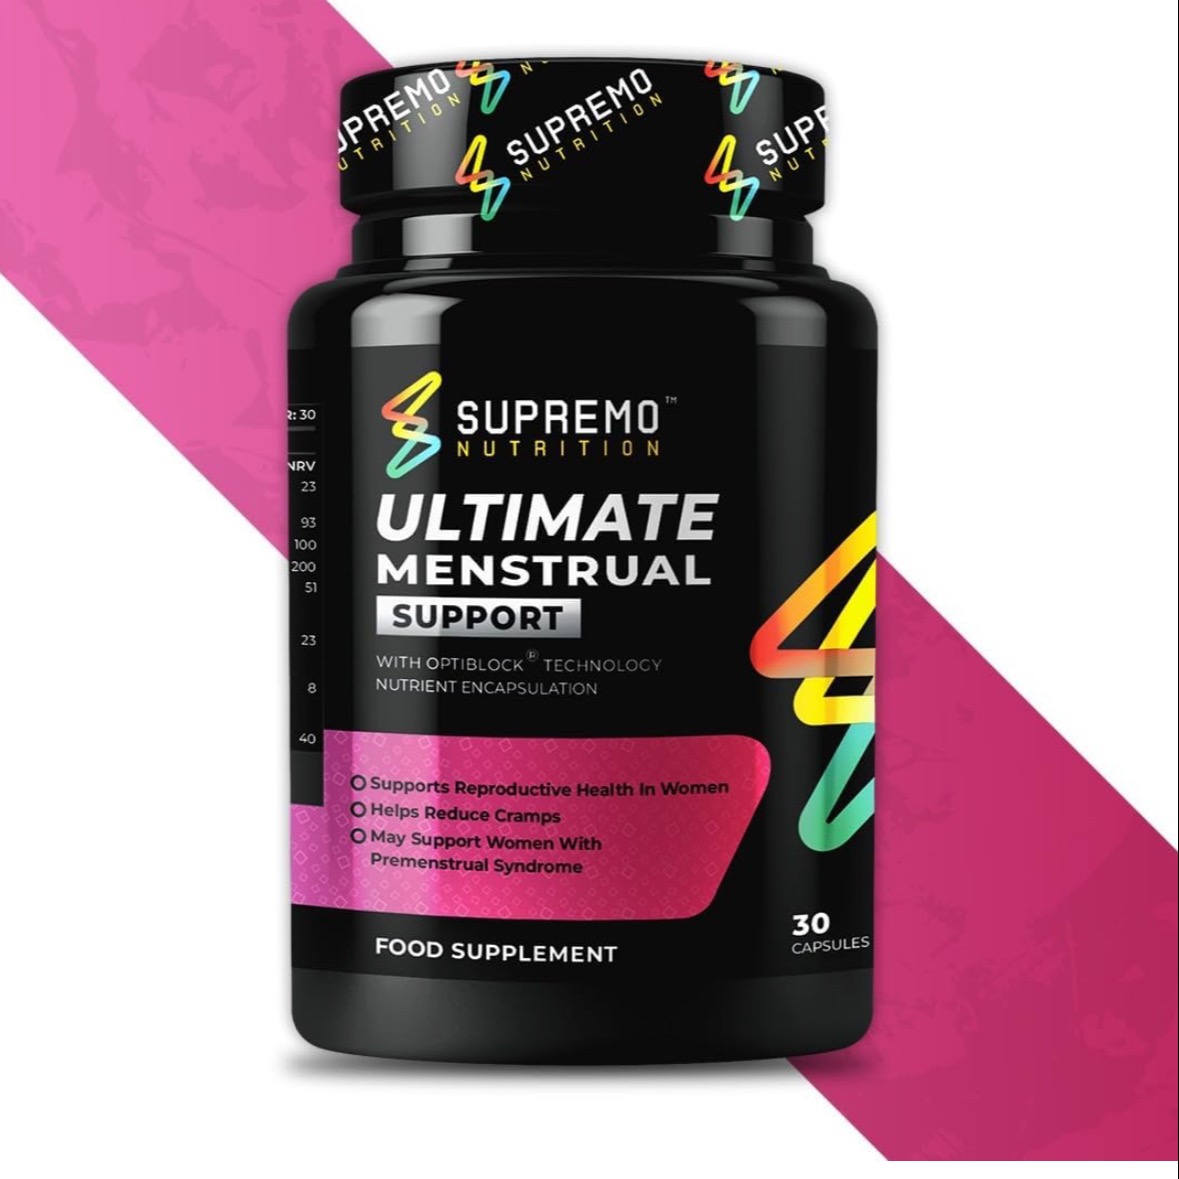 Experience the power of #SUPREMONUTRITION's Ultimate #MenstrualSupport!💪🌸These 30 capsules, enriched with Optiblock Technology, are designed to support reproductive health in women, reduce #cramps, &provide #relief for those dealing with #PremenstrualSyndrome. 
#OptimalHealth